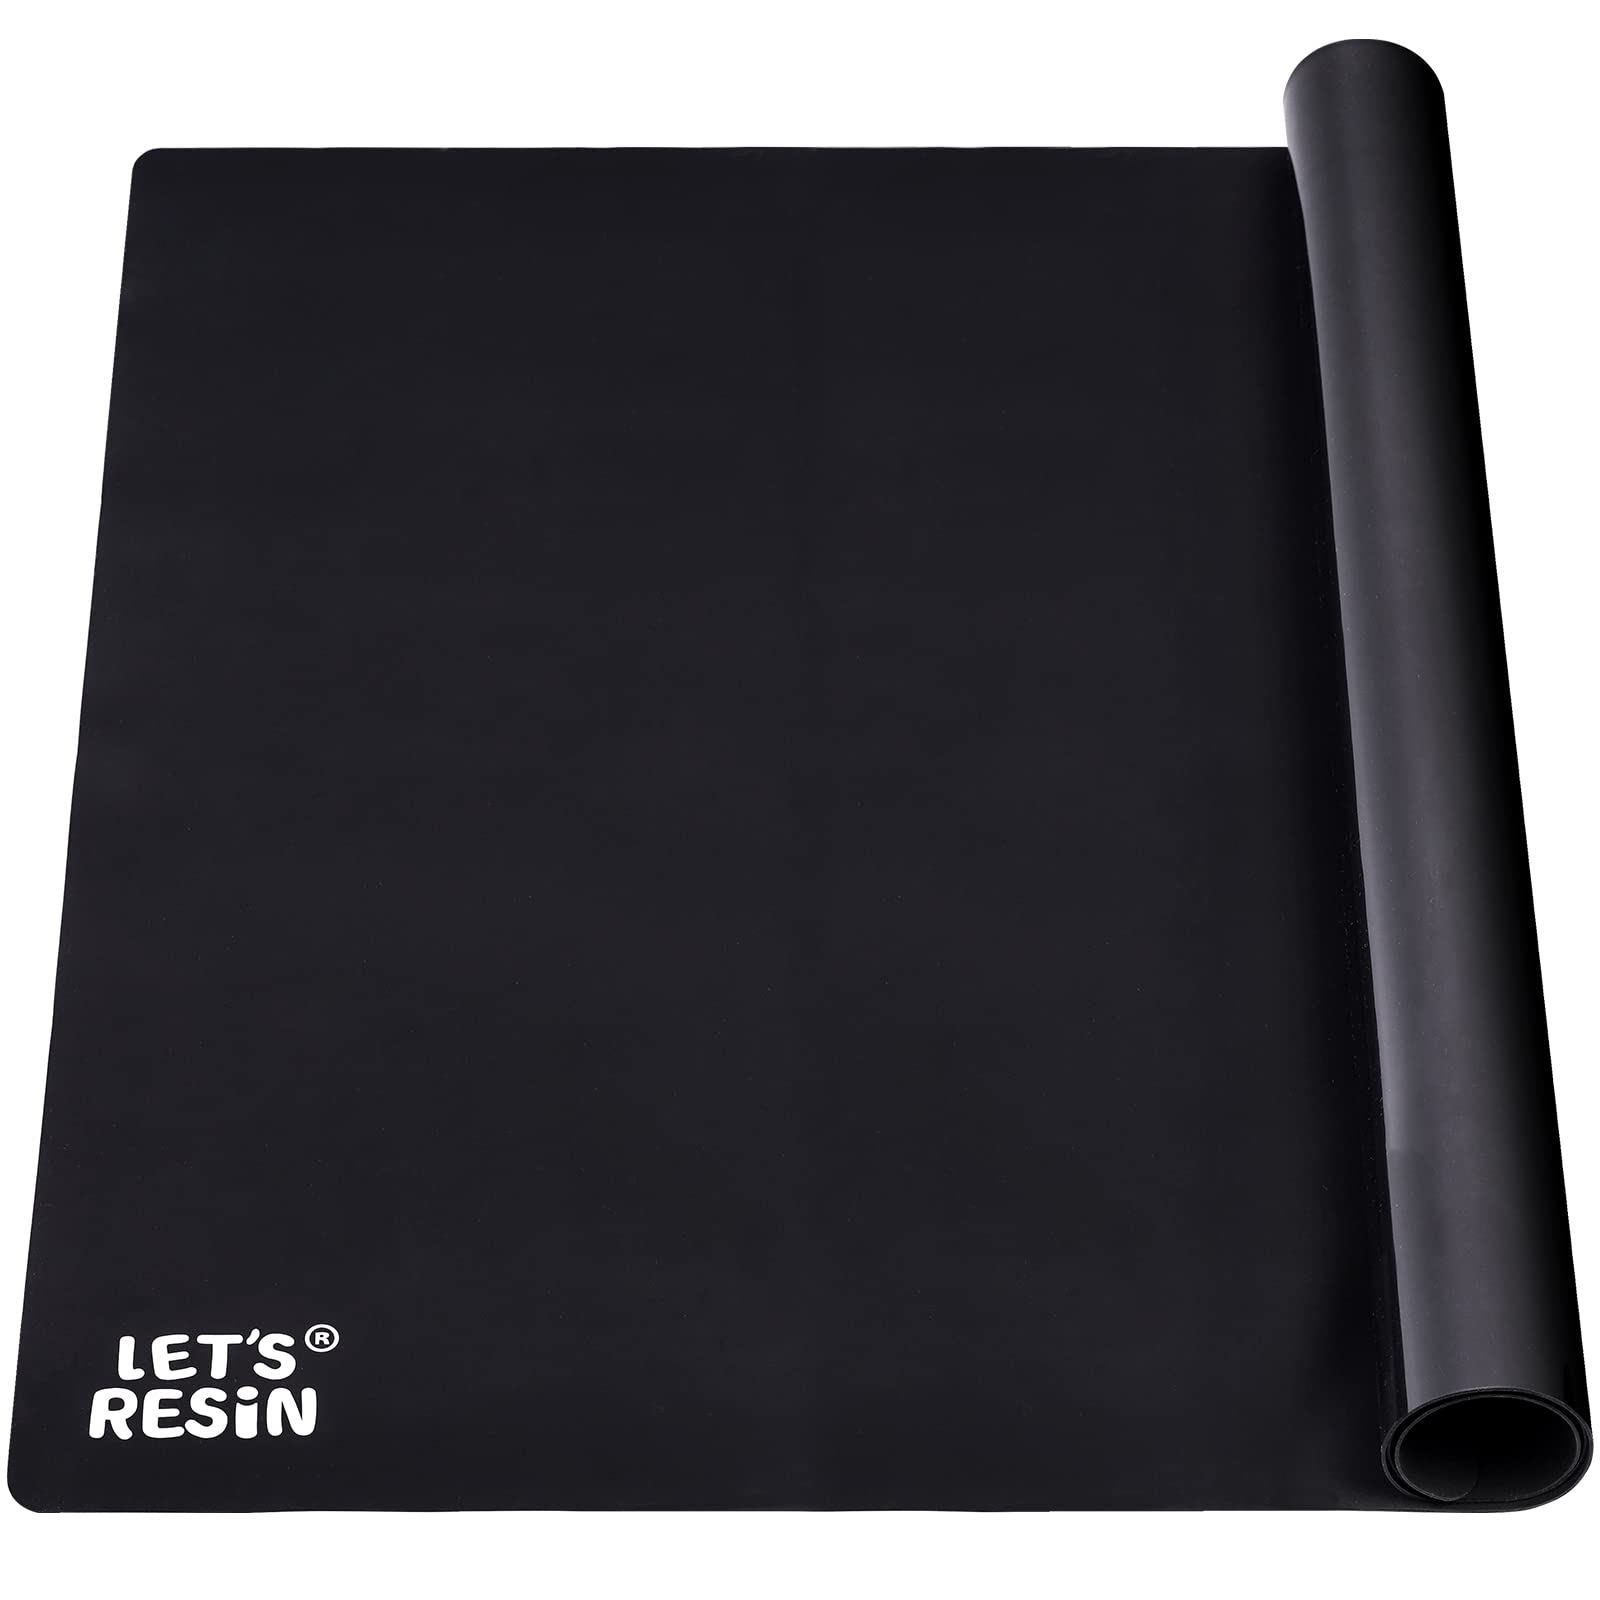 Book Cover LET'S RESIN Extra Large Silicone Mat for Crafts, 27.7'' x 19.7'' Black Large Silicone Sheets for Resin Jewelry Casting Molds, Nonskid Multipurpose Mat, Crafts Mat for Epoxy Resin, Art Painting